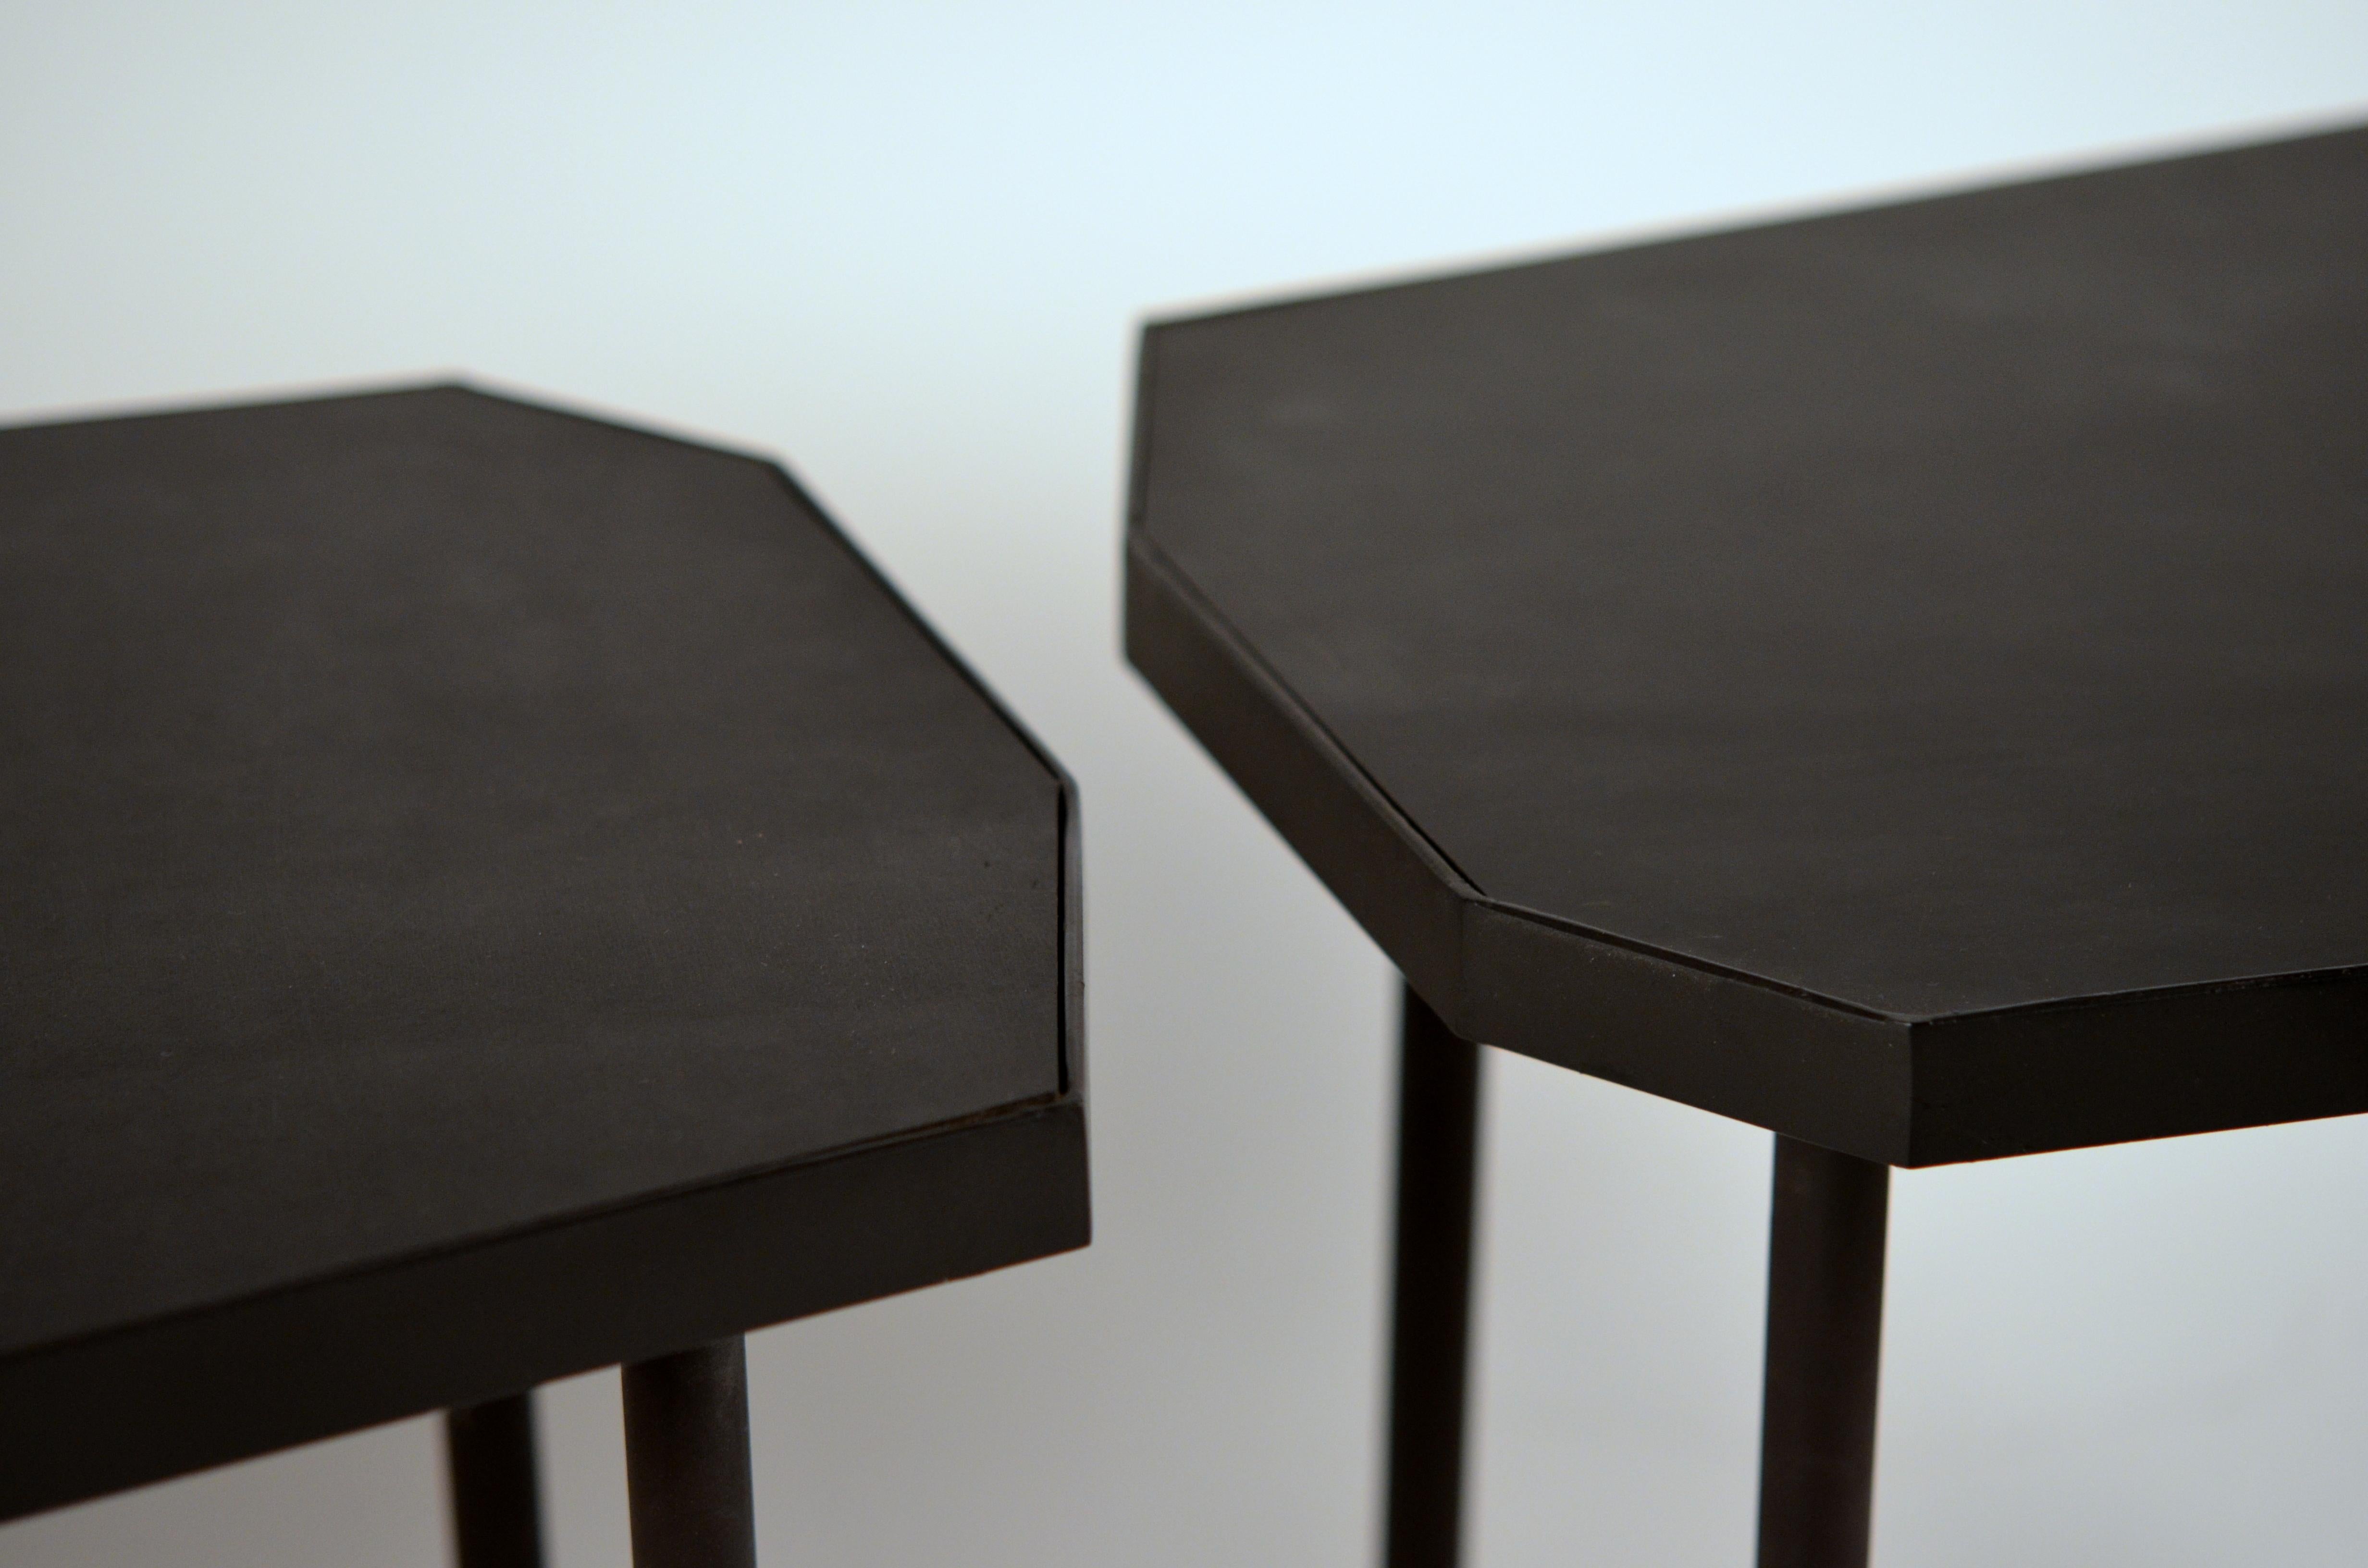 Pair of Asymmetrical 'Décagone' Black Leather Side Tables by Design Frères For Sale 1